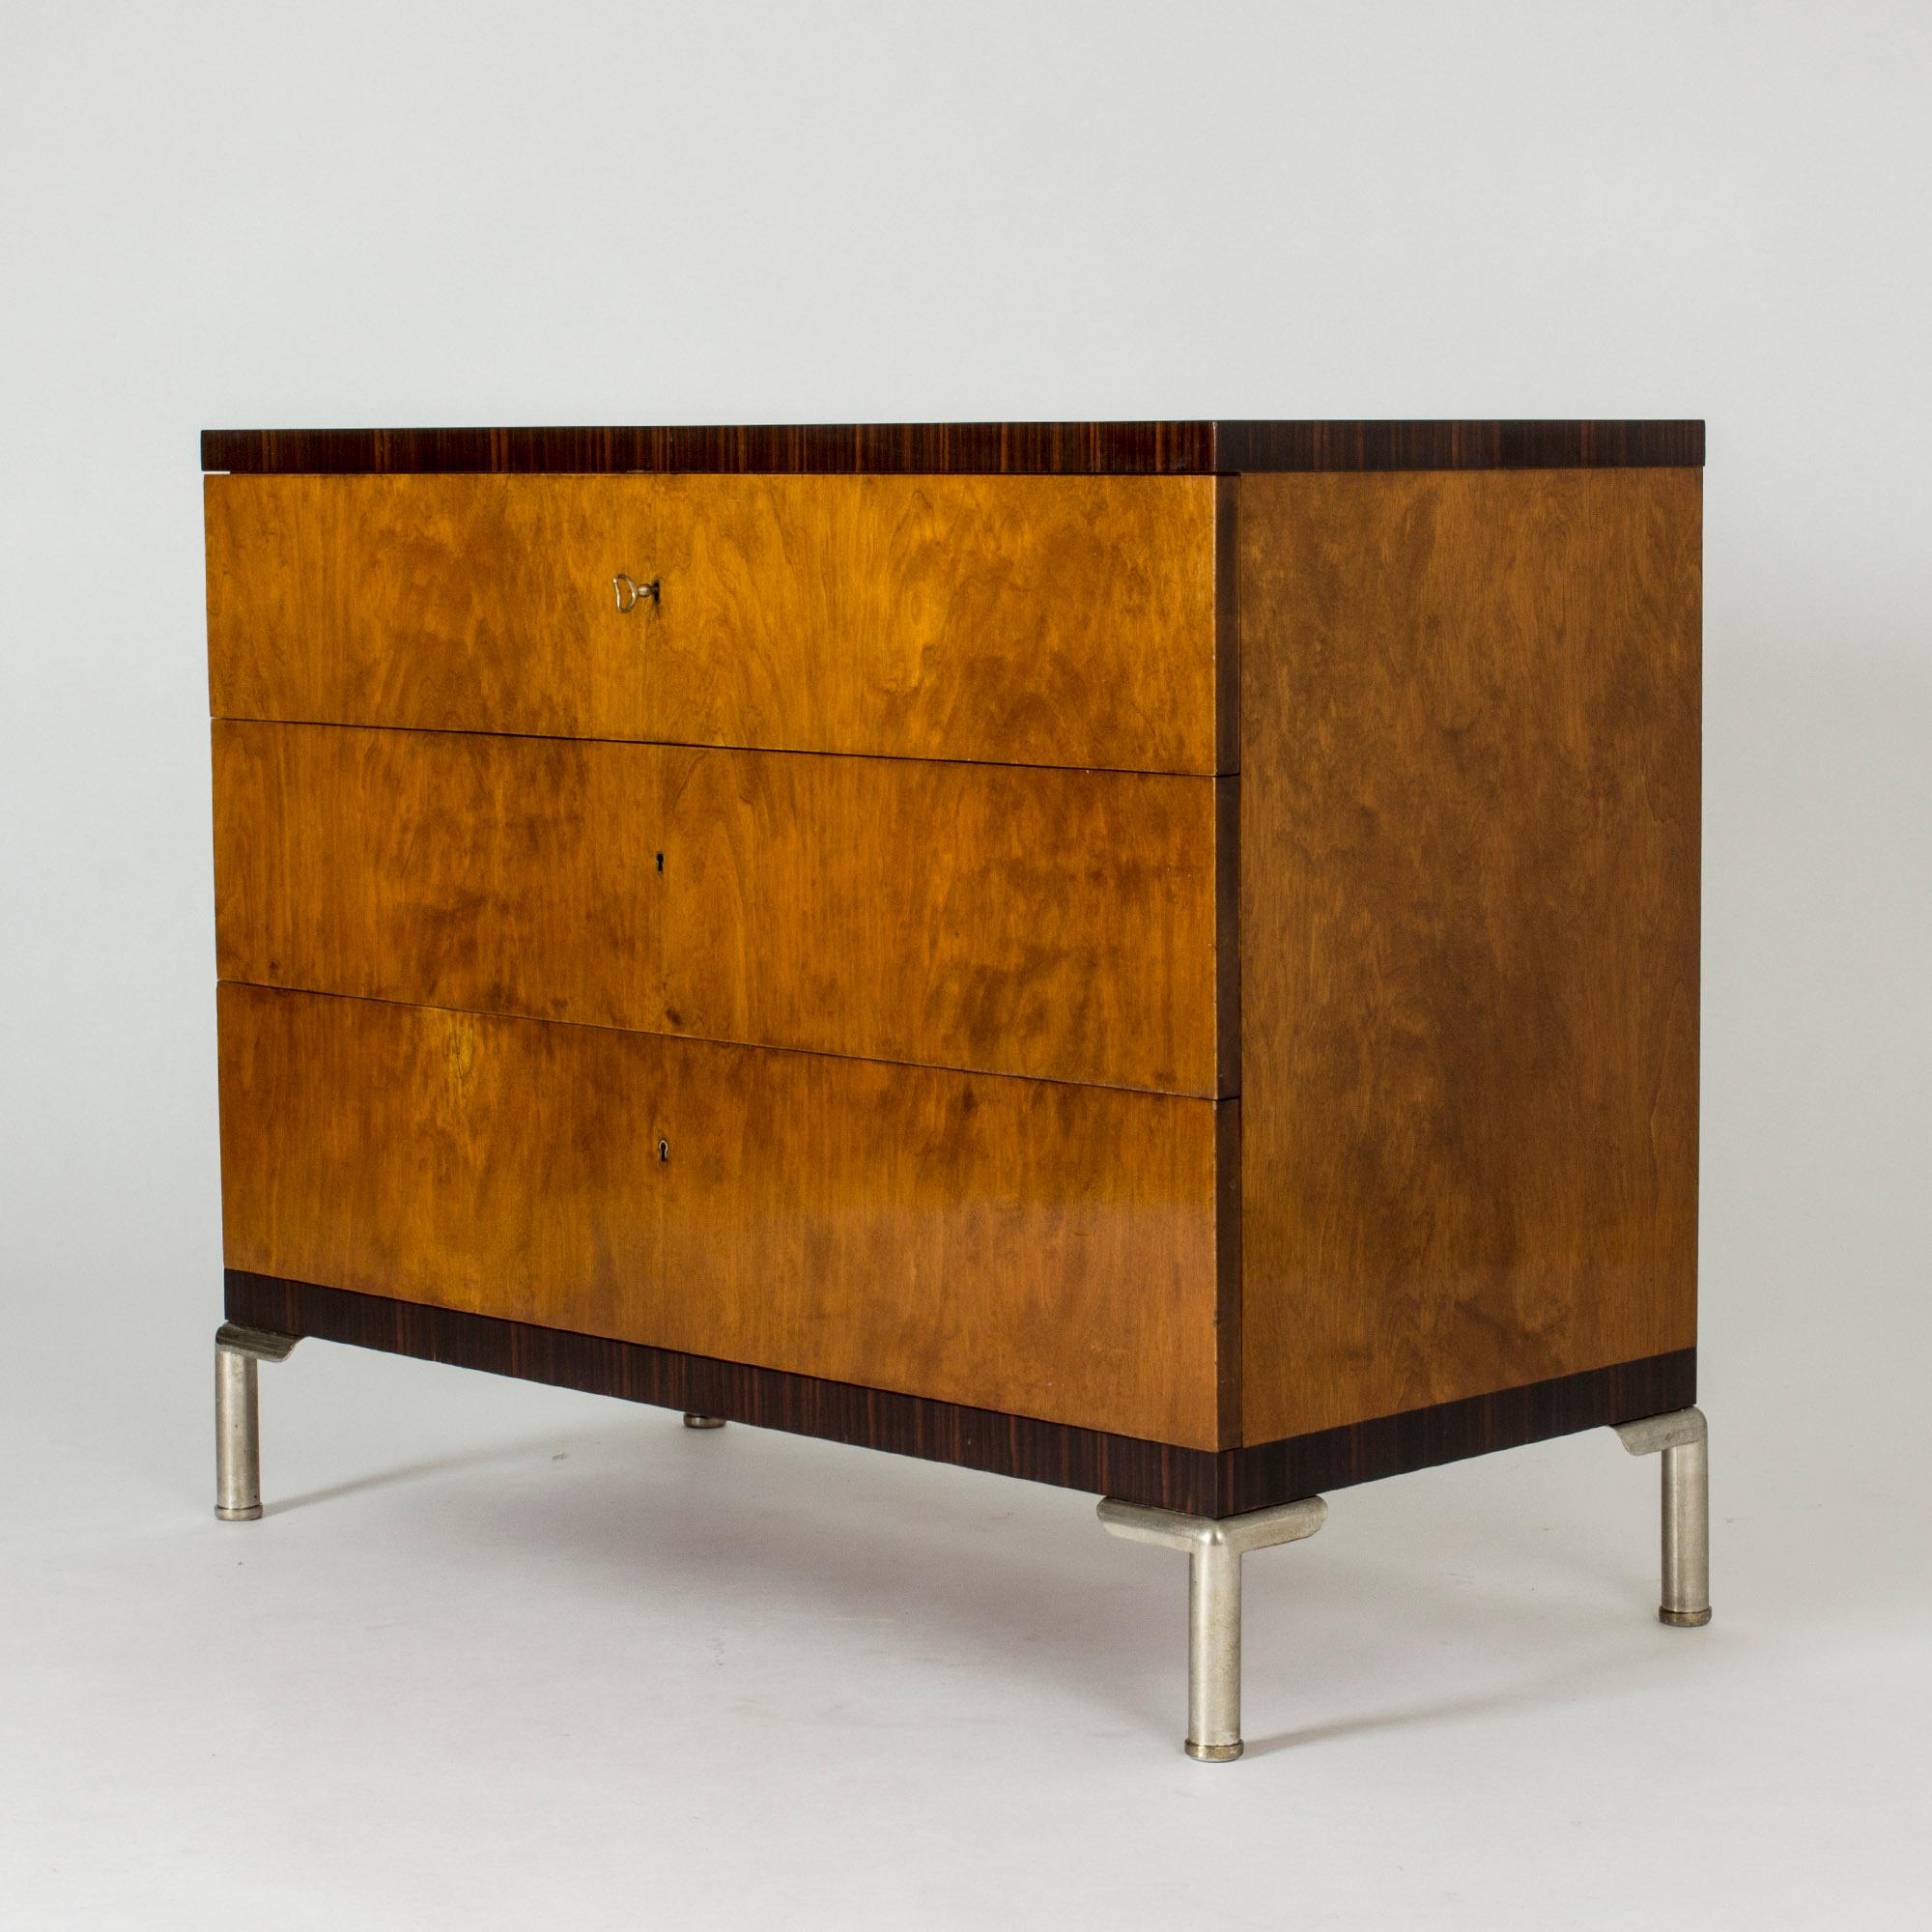 “Record” chest of drawers by Axel Einar Hjort, made from birch and ebony, with steel legs. Designed in 1932, it is strikingly modern with its clean lines and mix of materials.